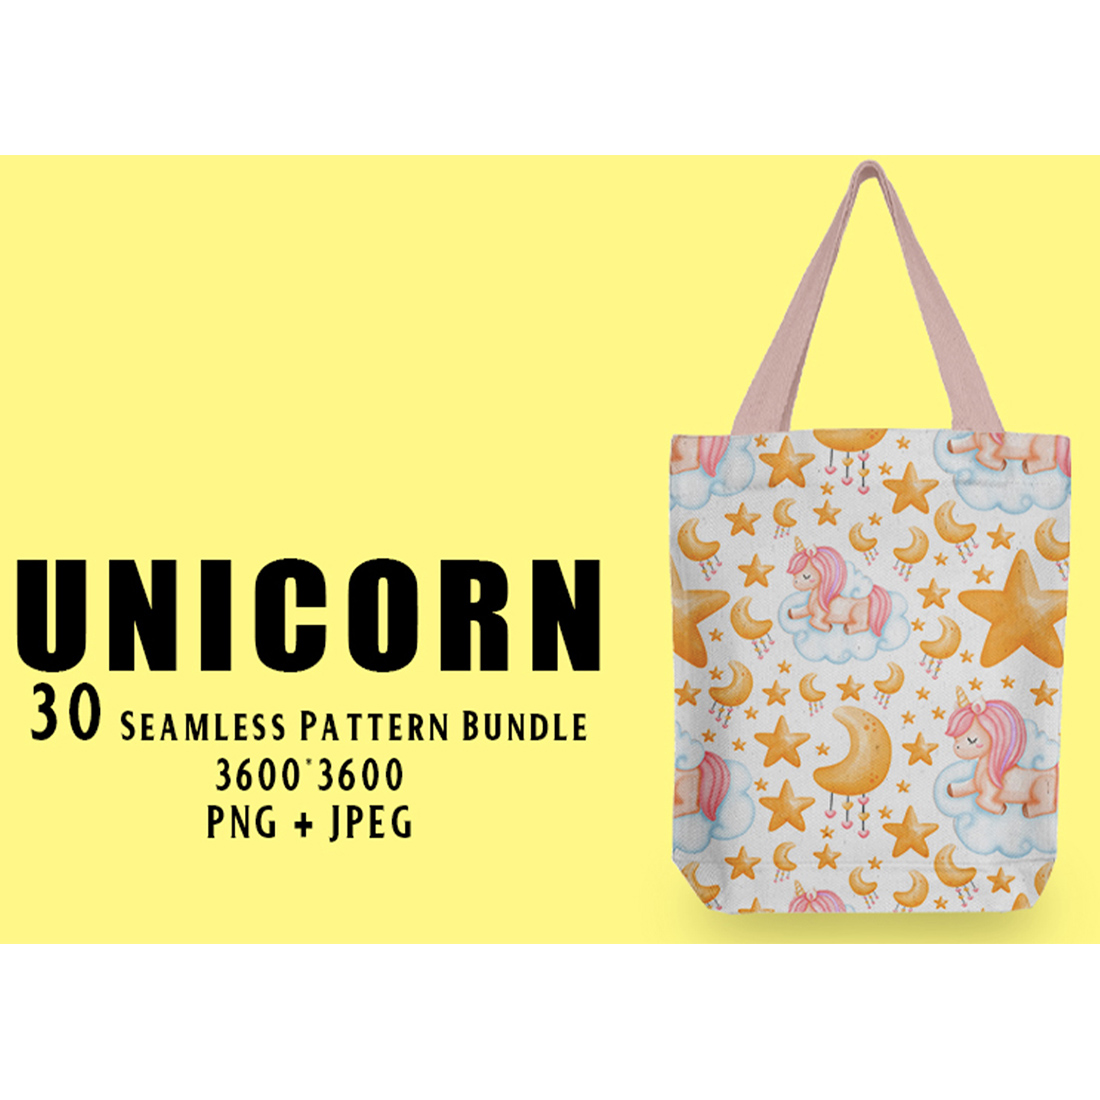 Image of bag with adorable unicorn patterns